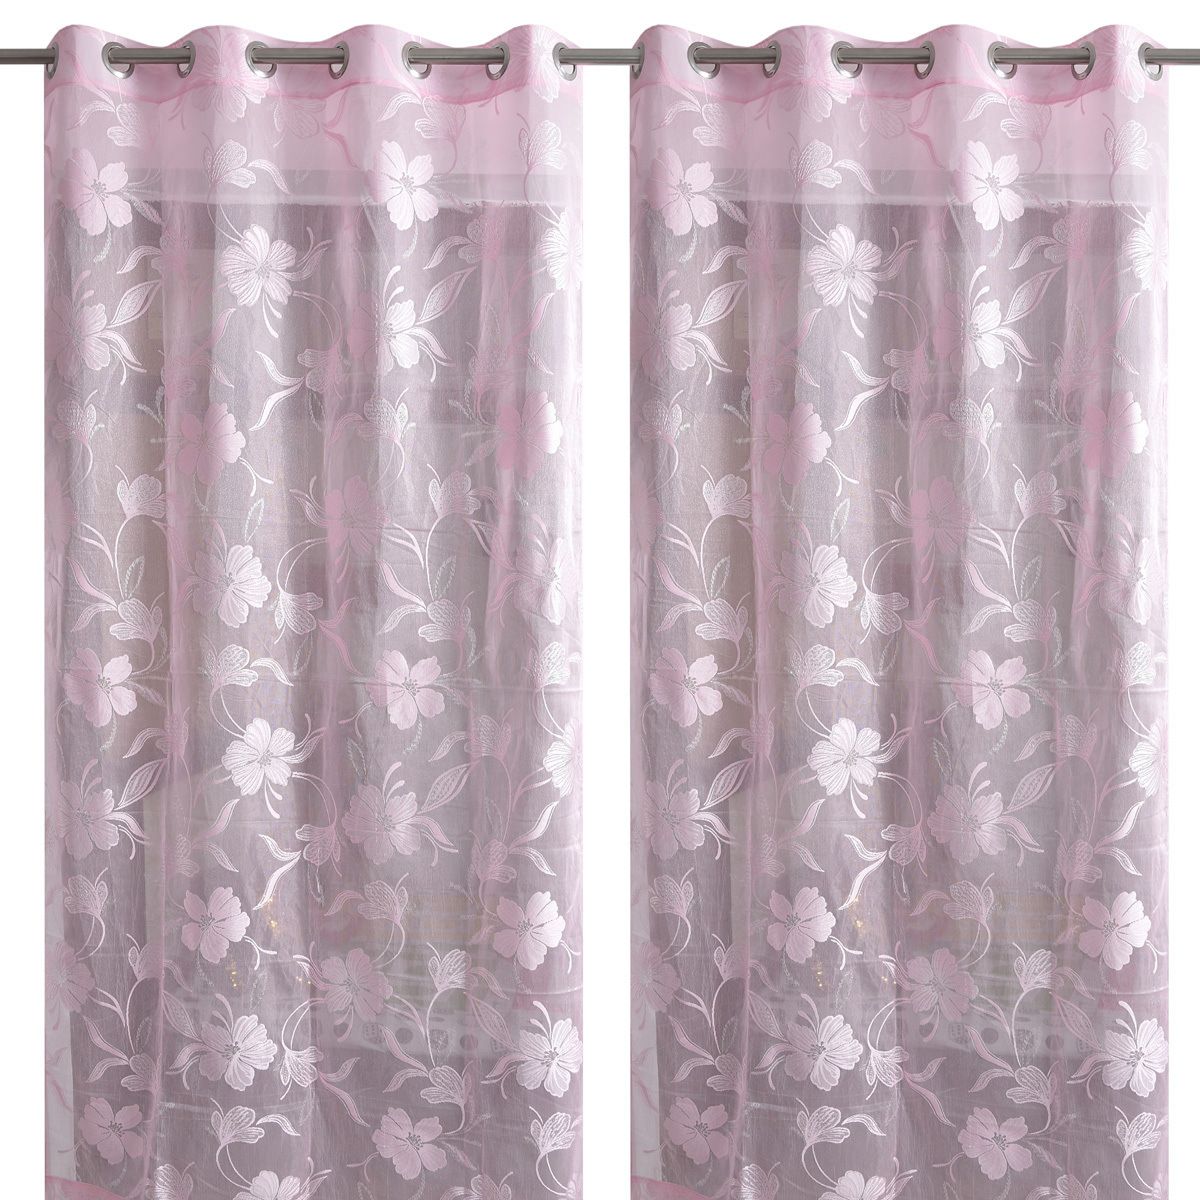 HANDTEX HOME Sheer Pink Net Curtains With Beautiful Embroidered Floral Designs for Door 4ft x 9ft Set of 2 SP03